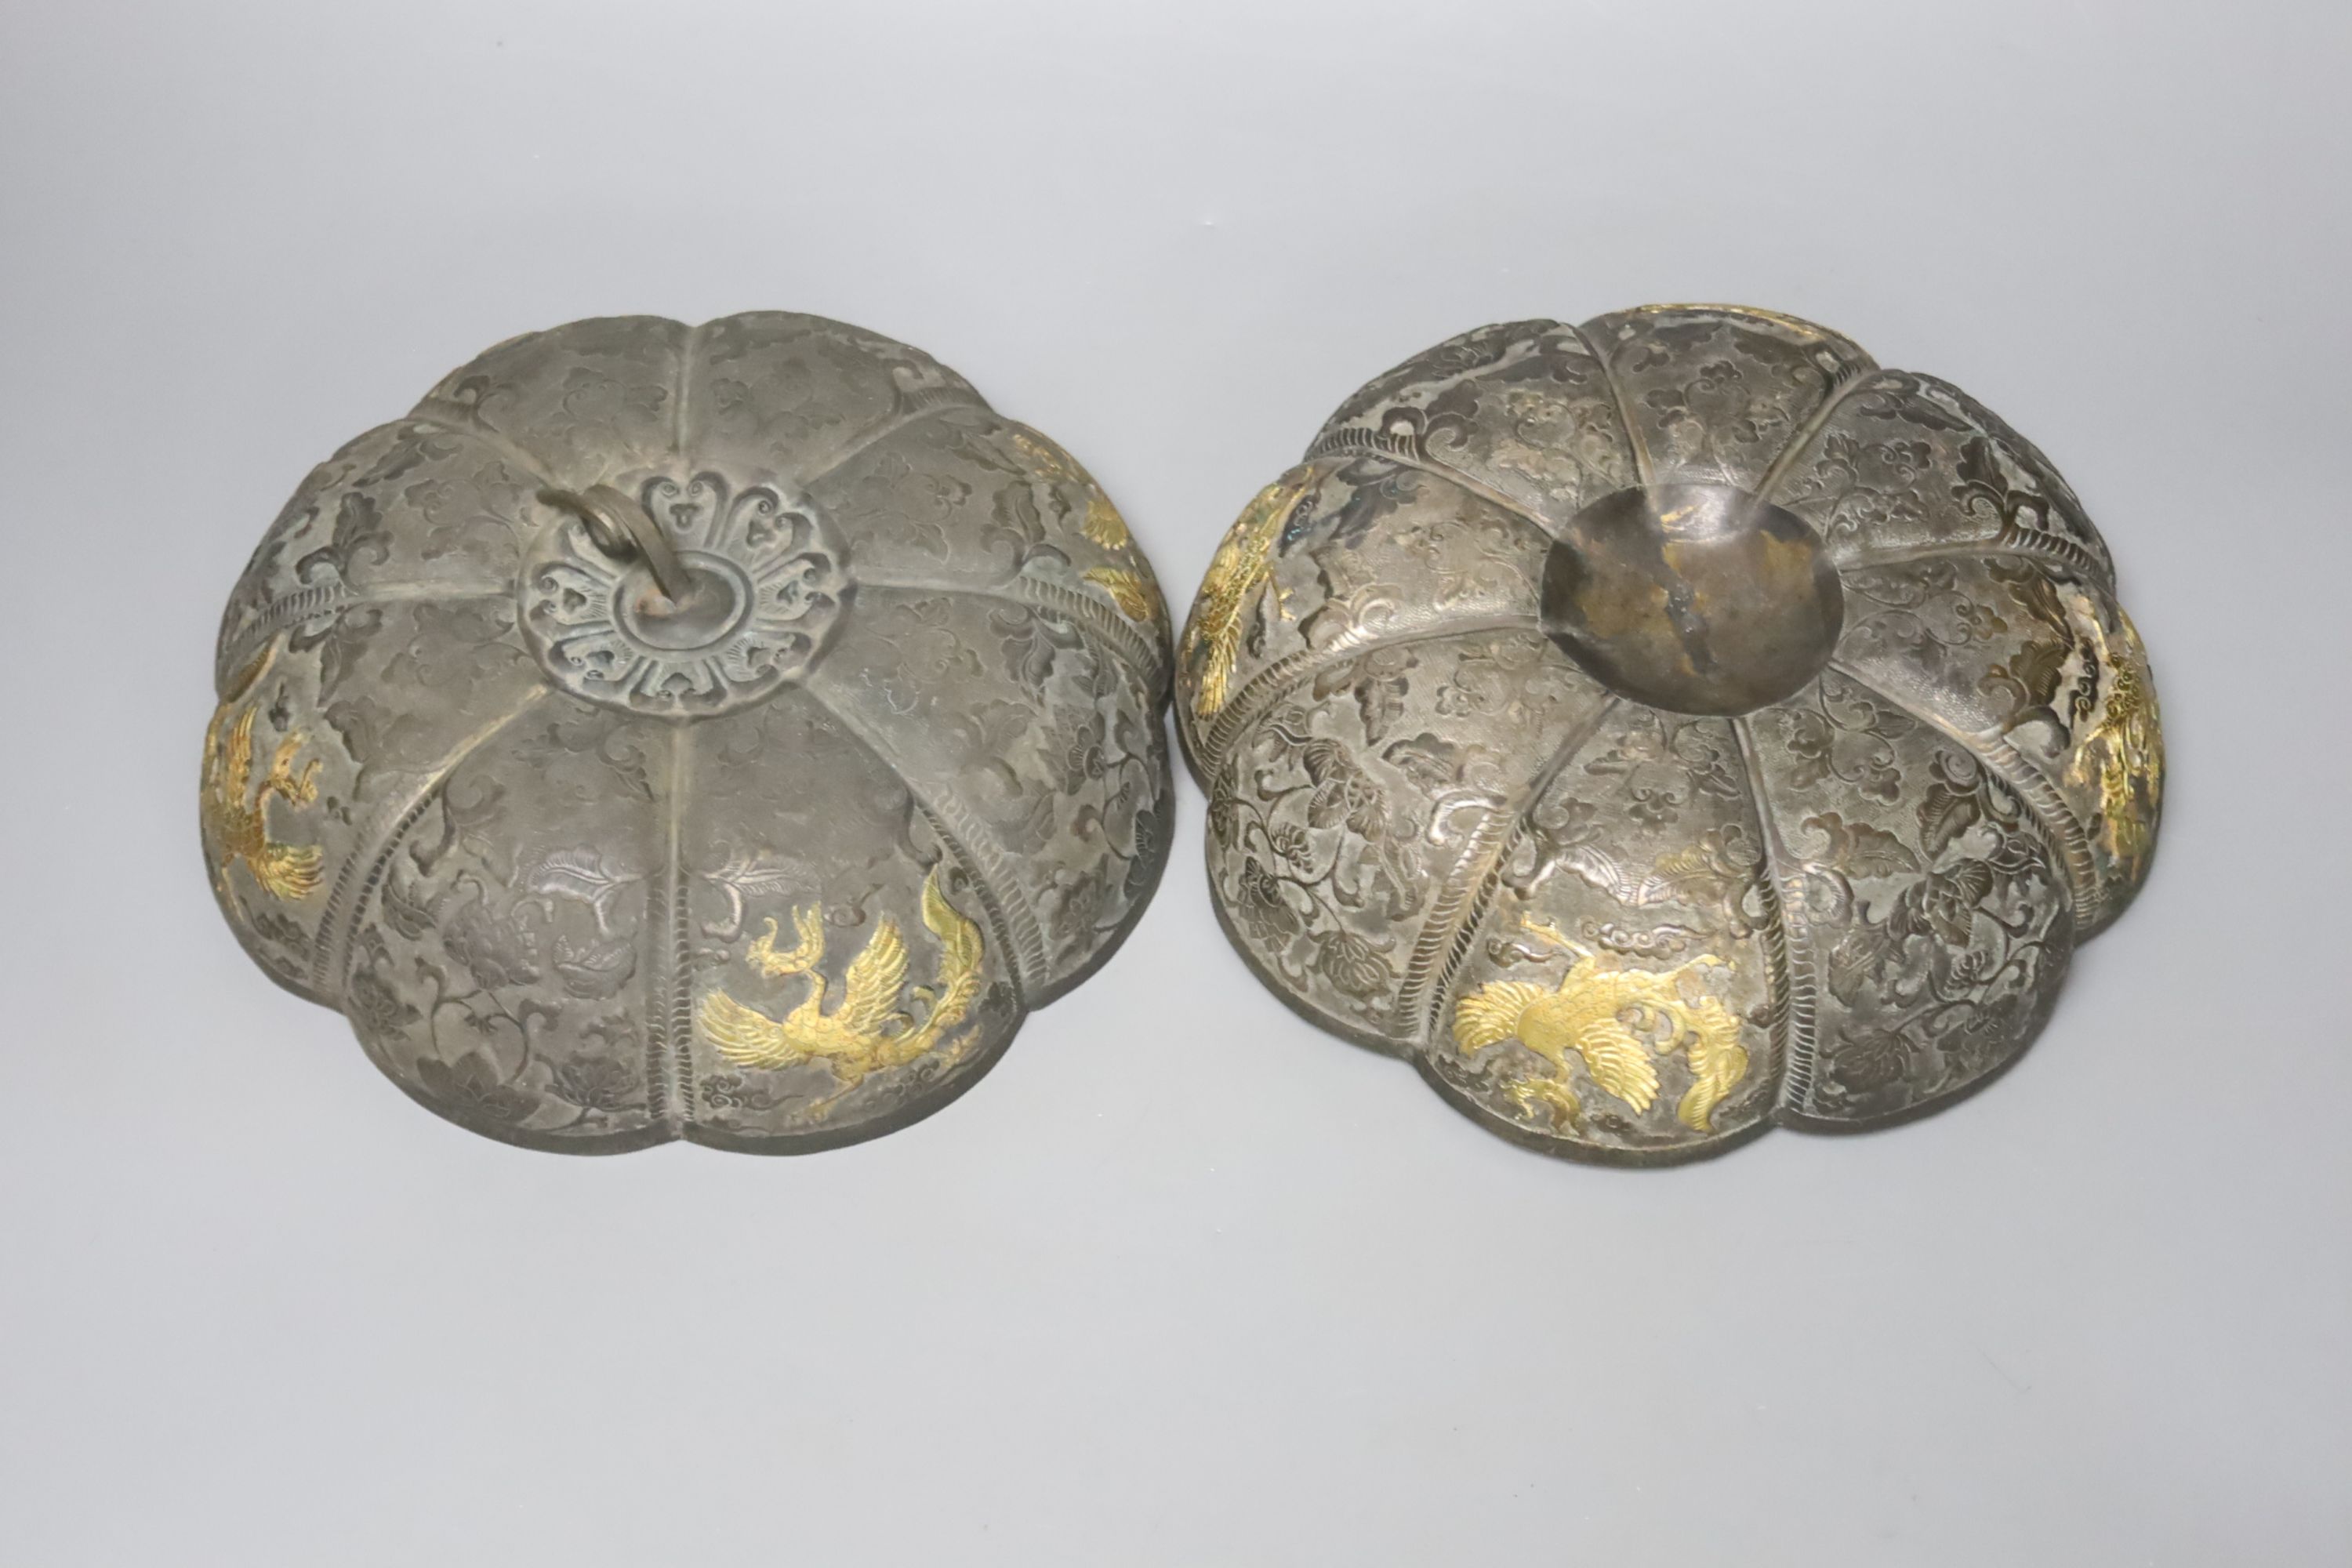 A 19th century Chinese melon-shaped silvered bronze box and cover, applied with gold figures of dragons in flight, Tang dynasty or later, 19cm diameter 10cm high